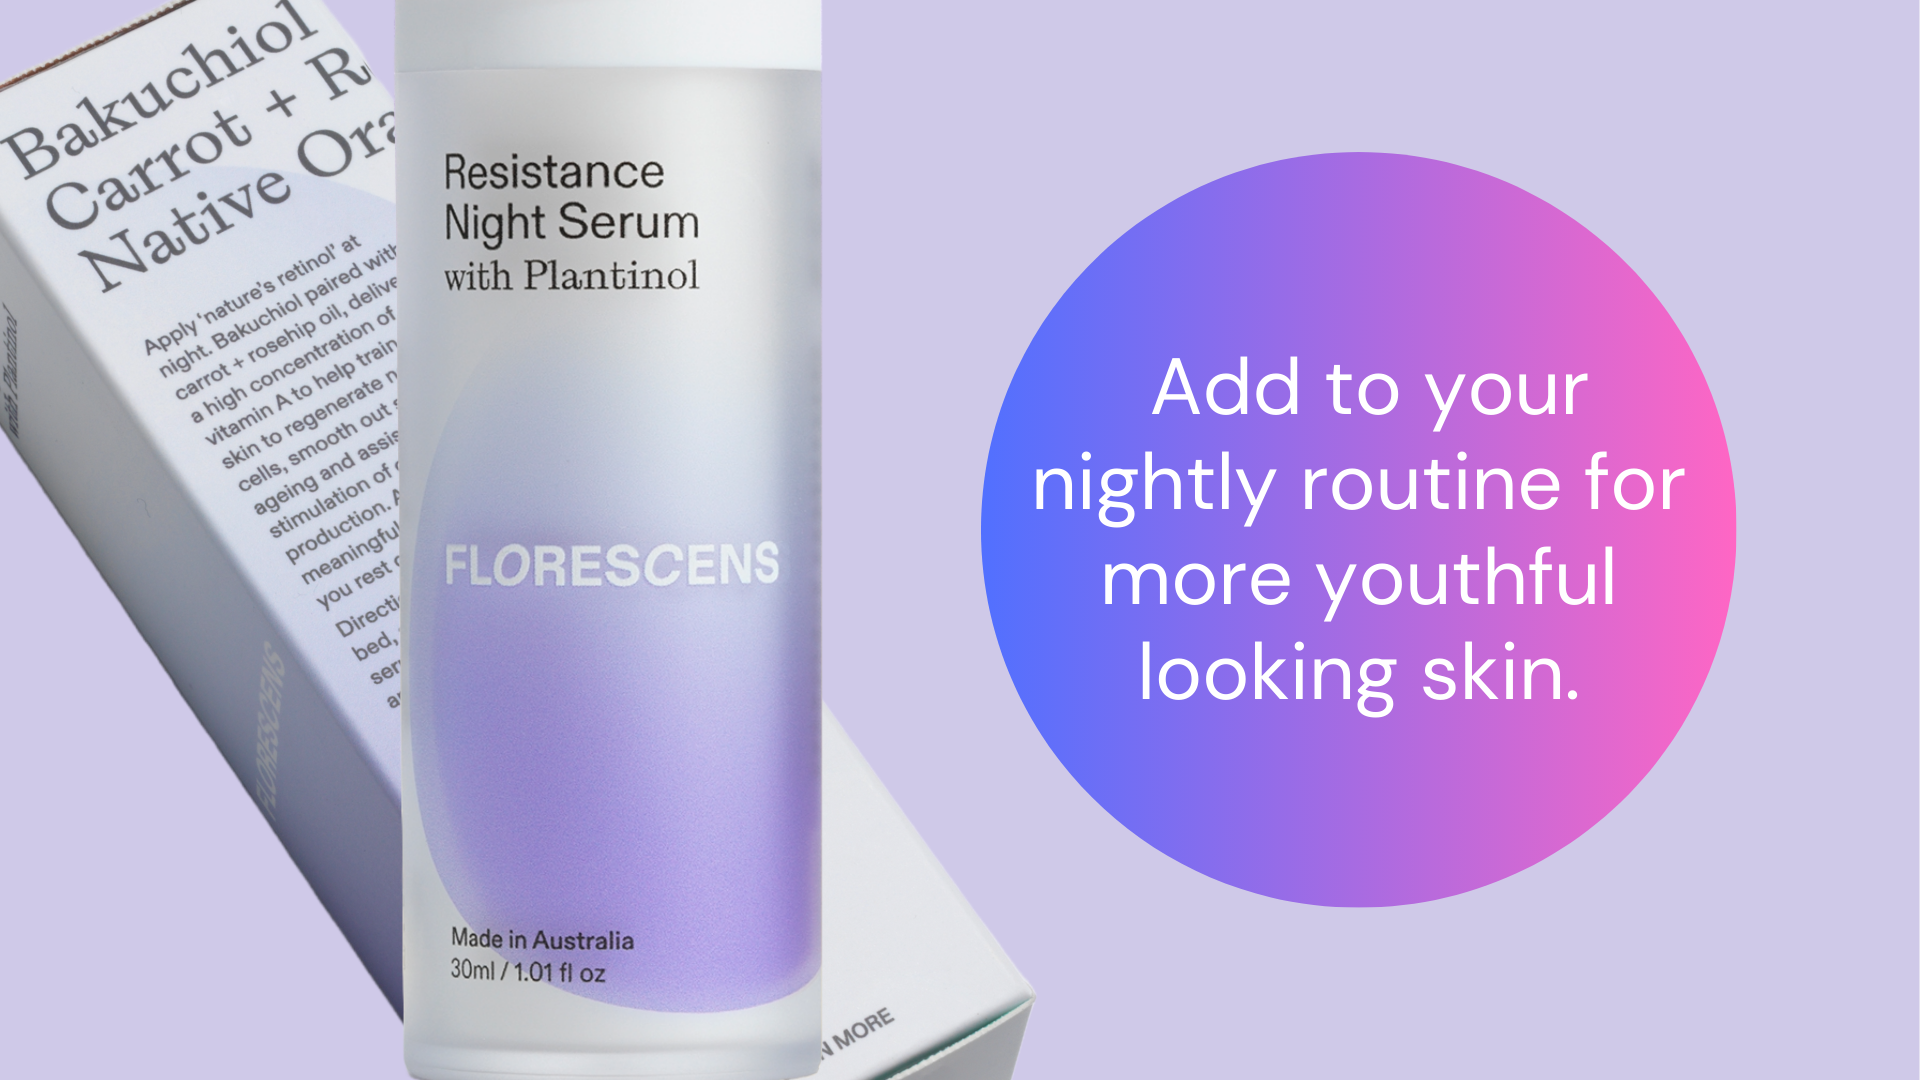 "Florescens Resistance Night Serum with Bakuchiol for Younger Looking Skin"